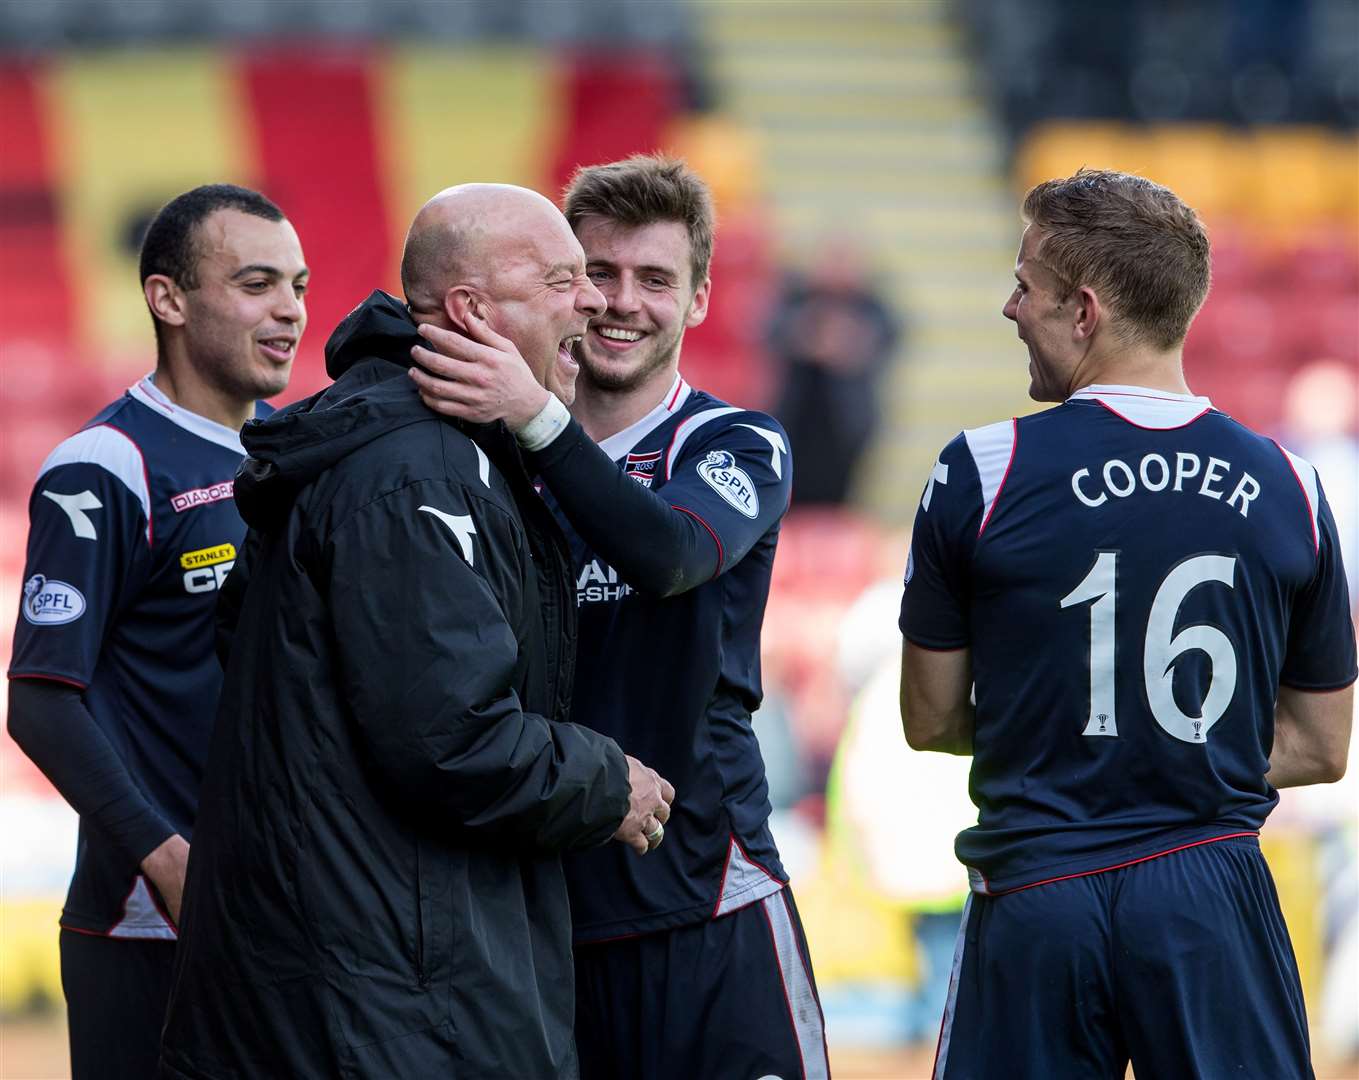 Then-Ross County assistant manager Neale Cooper celebrates the win over Partick Thistle with son Alex and Graham Carey. Picture: Ken Macpherson